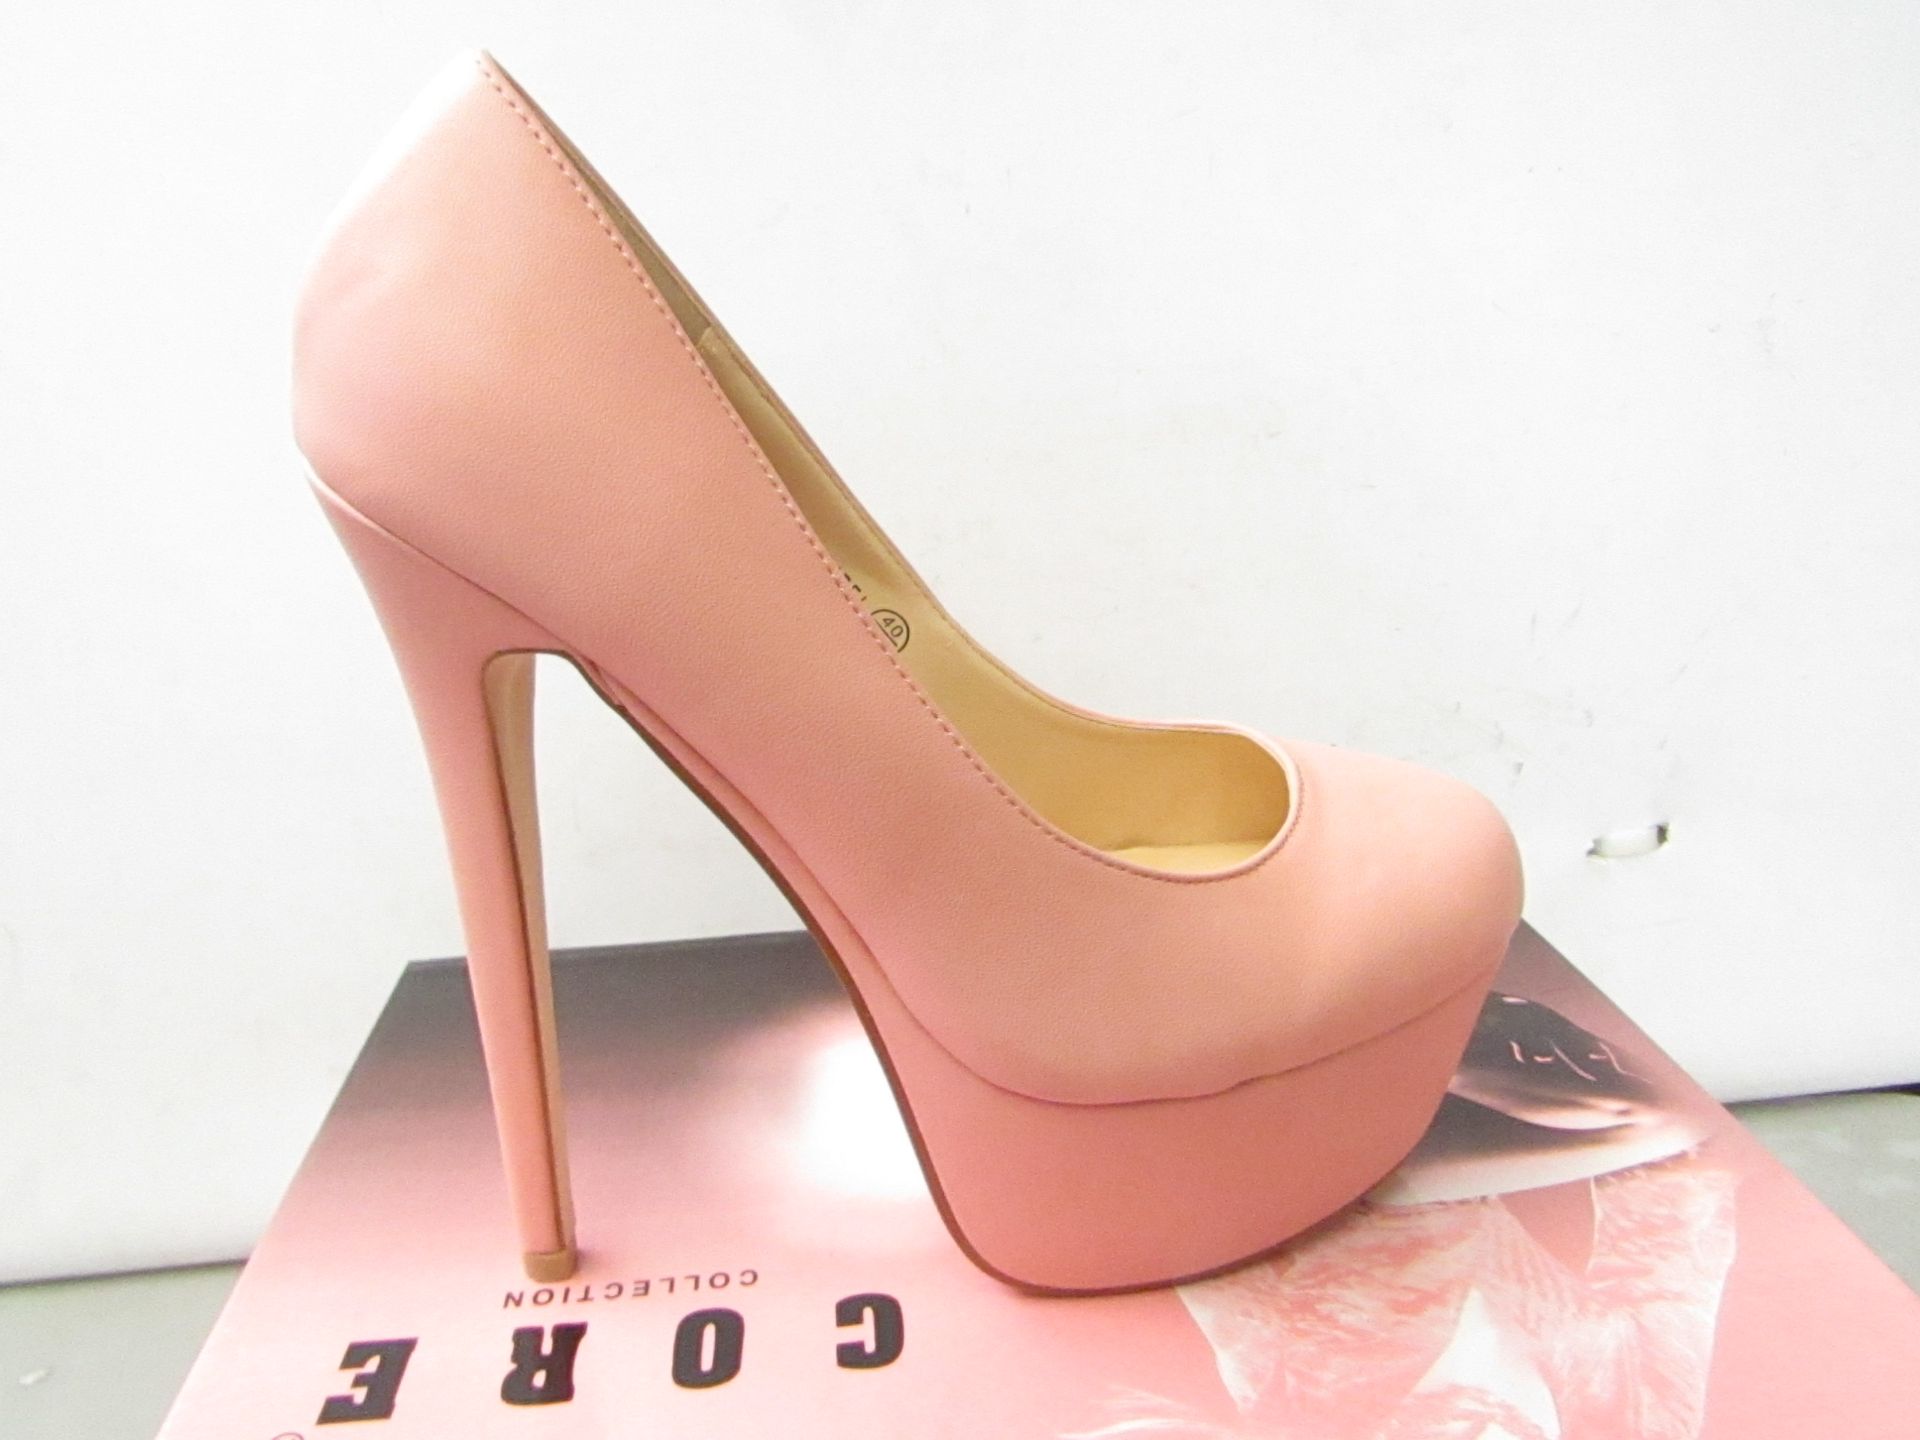 Core Collection Raizel Coral coloured leather styled shoe with approx 6" heel size 7 new & boxed